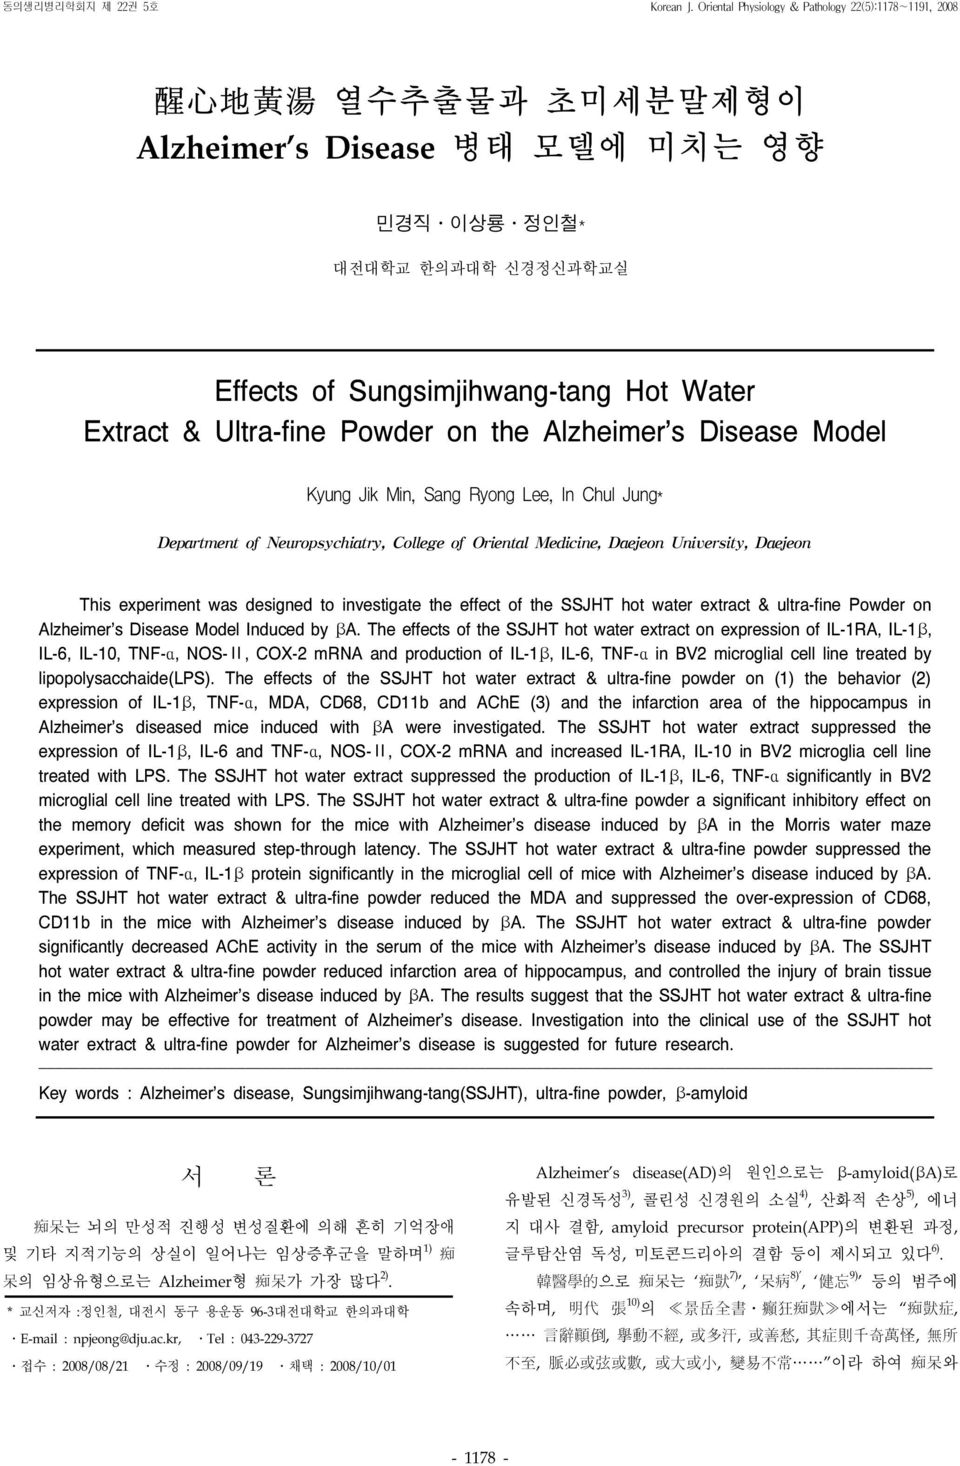 Ultra-fine Powder on the Alzheimer's Disease Model Kyung Jik Min, Sang Ryong Lee, In Chul Jung Department of Neuropsychiatry, College of Oriental Medicine, Daejeon University, Daejeon This experiment